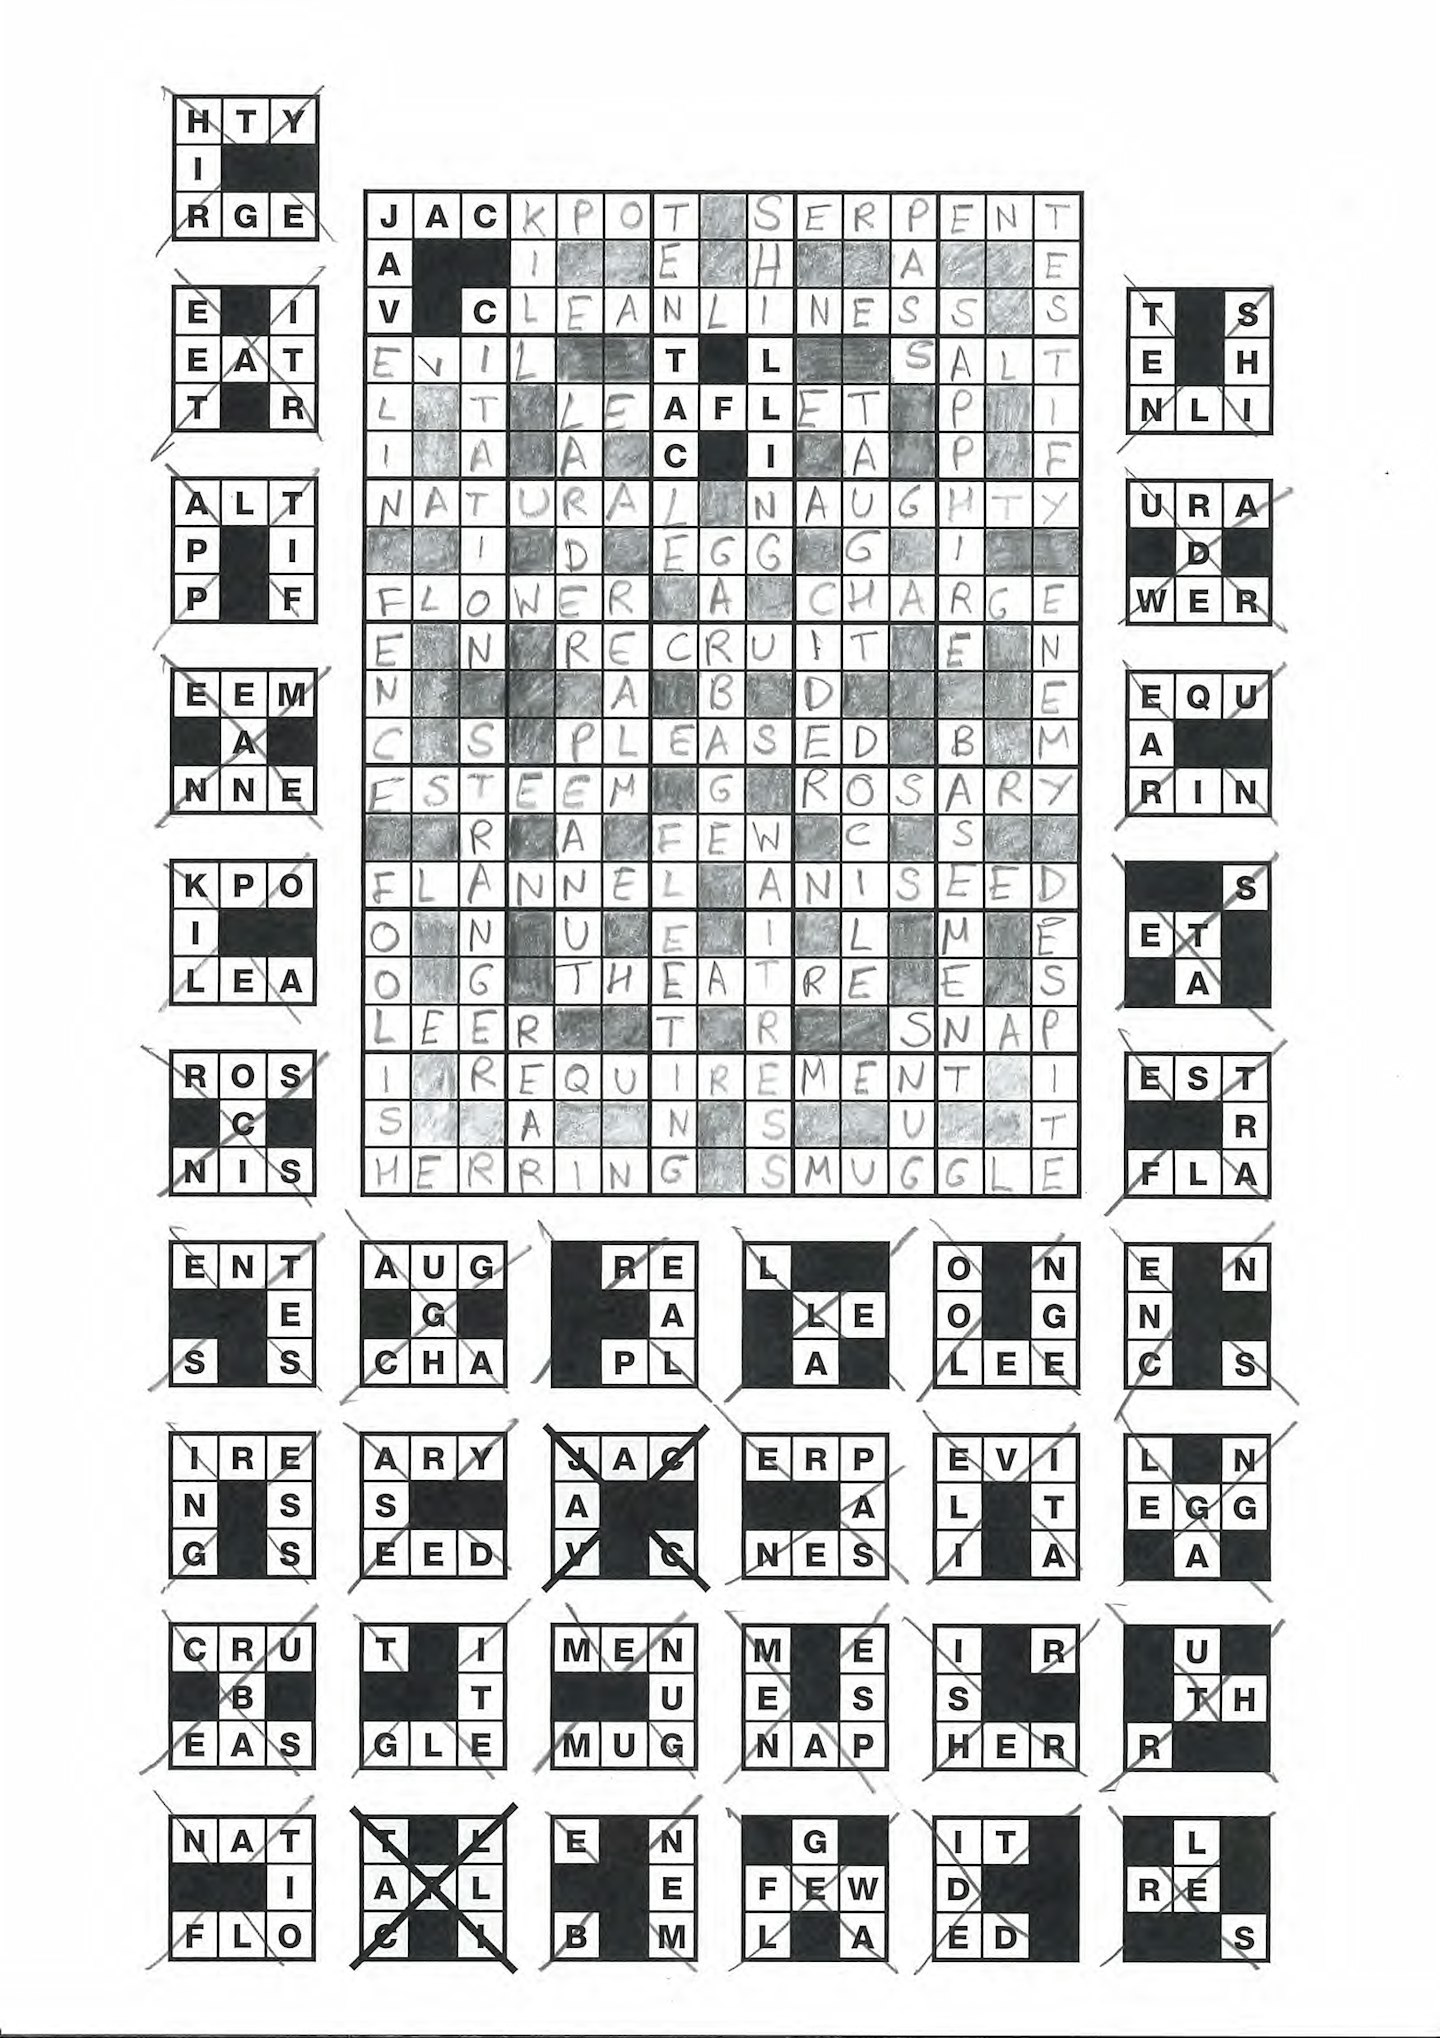 Bits and Pieces example grid 4